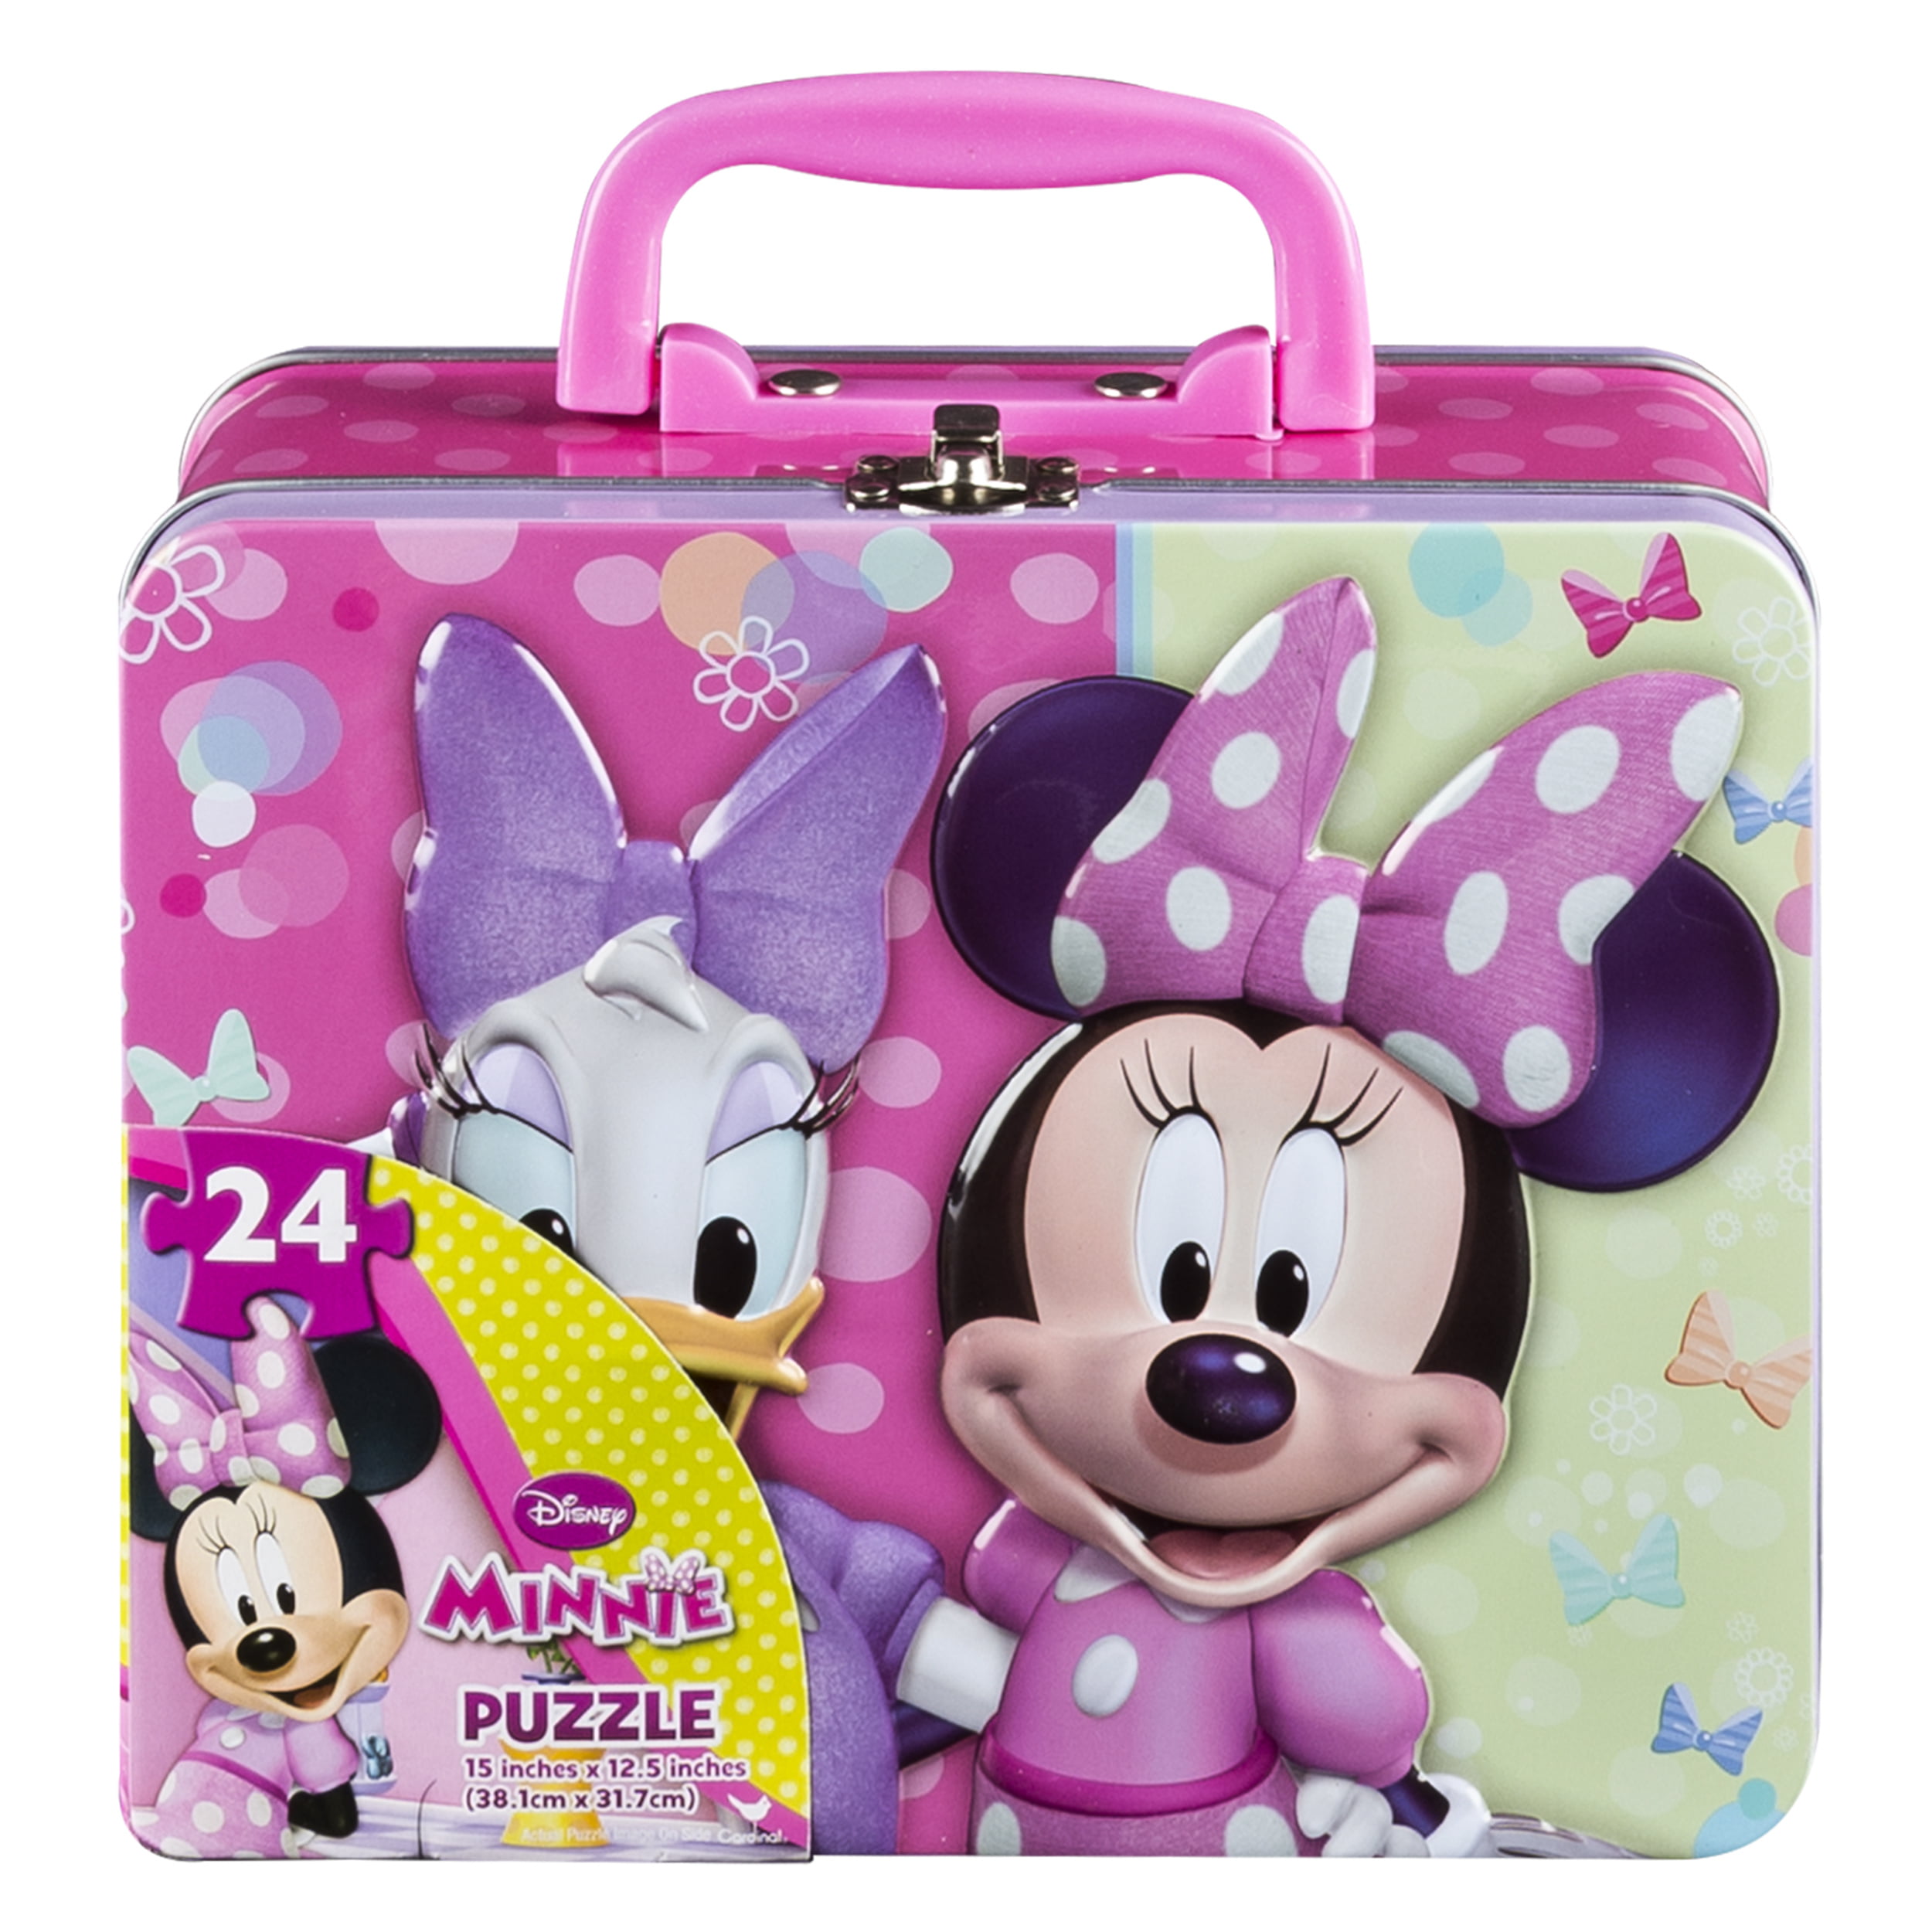 Disney Junior Minnie Mouse 24 Piece Puzzle in Tin Box with